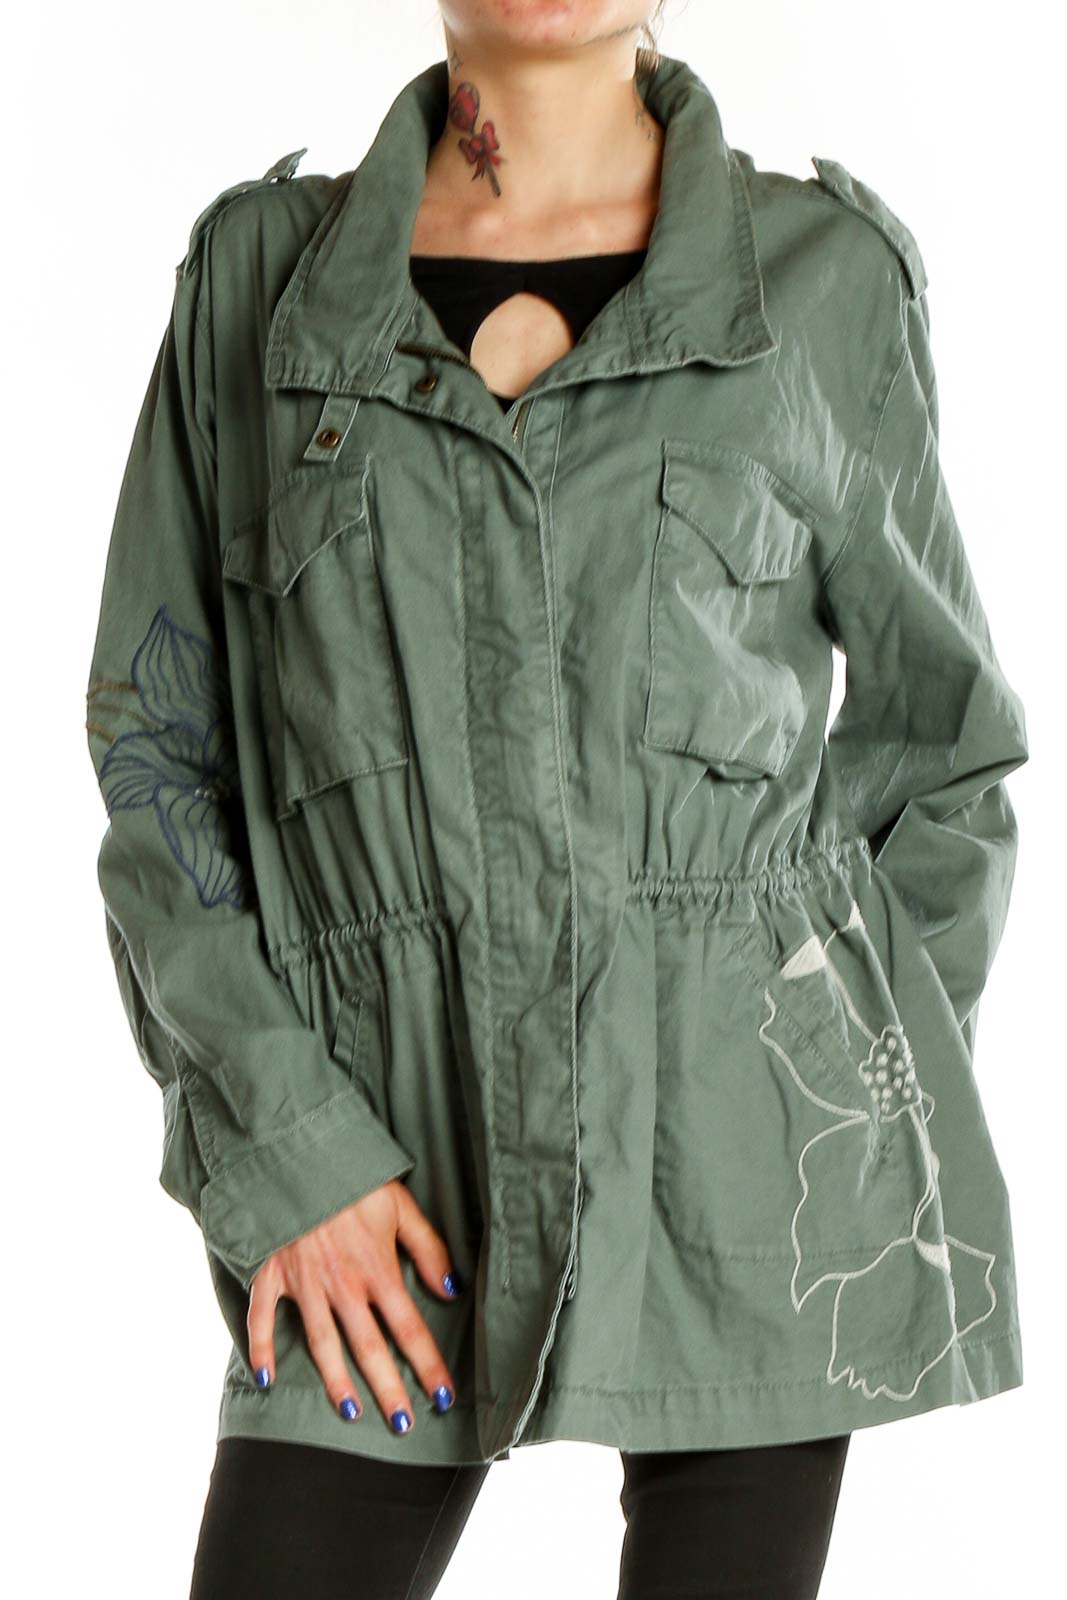 Green Flower Embroidered Military Jacket Front